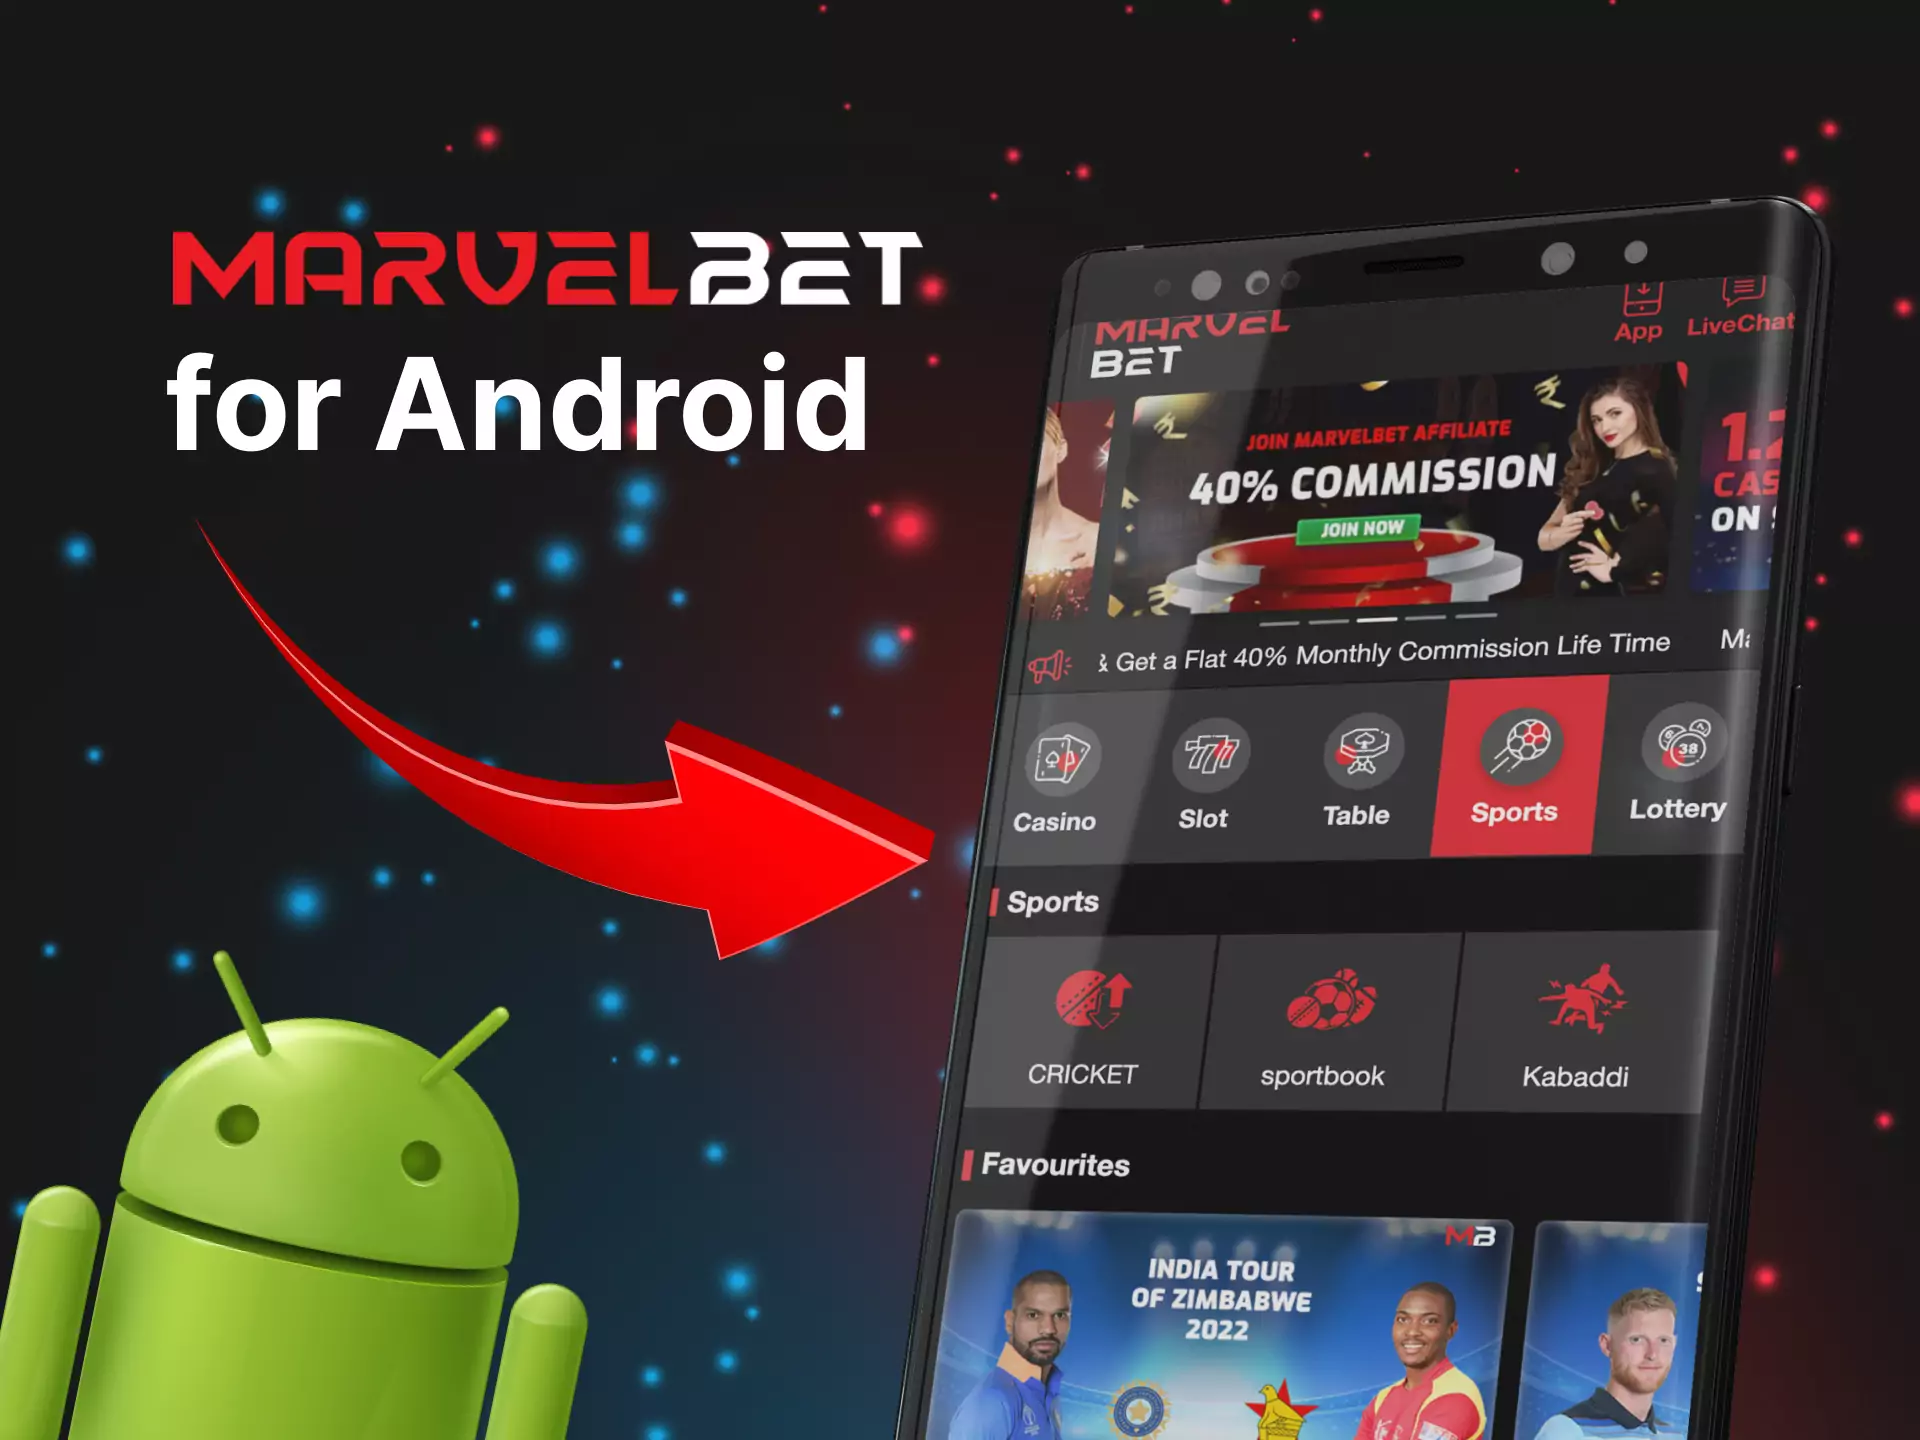 Owners of Android devices can download the Marvelbet app right on the official website.